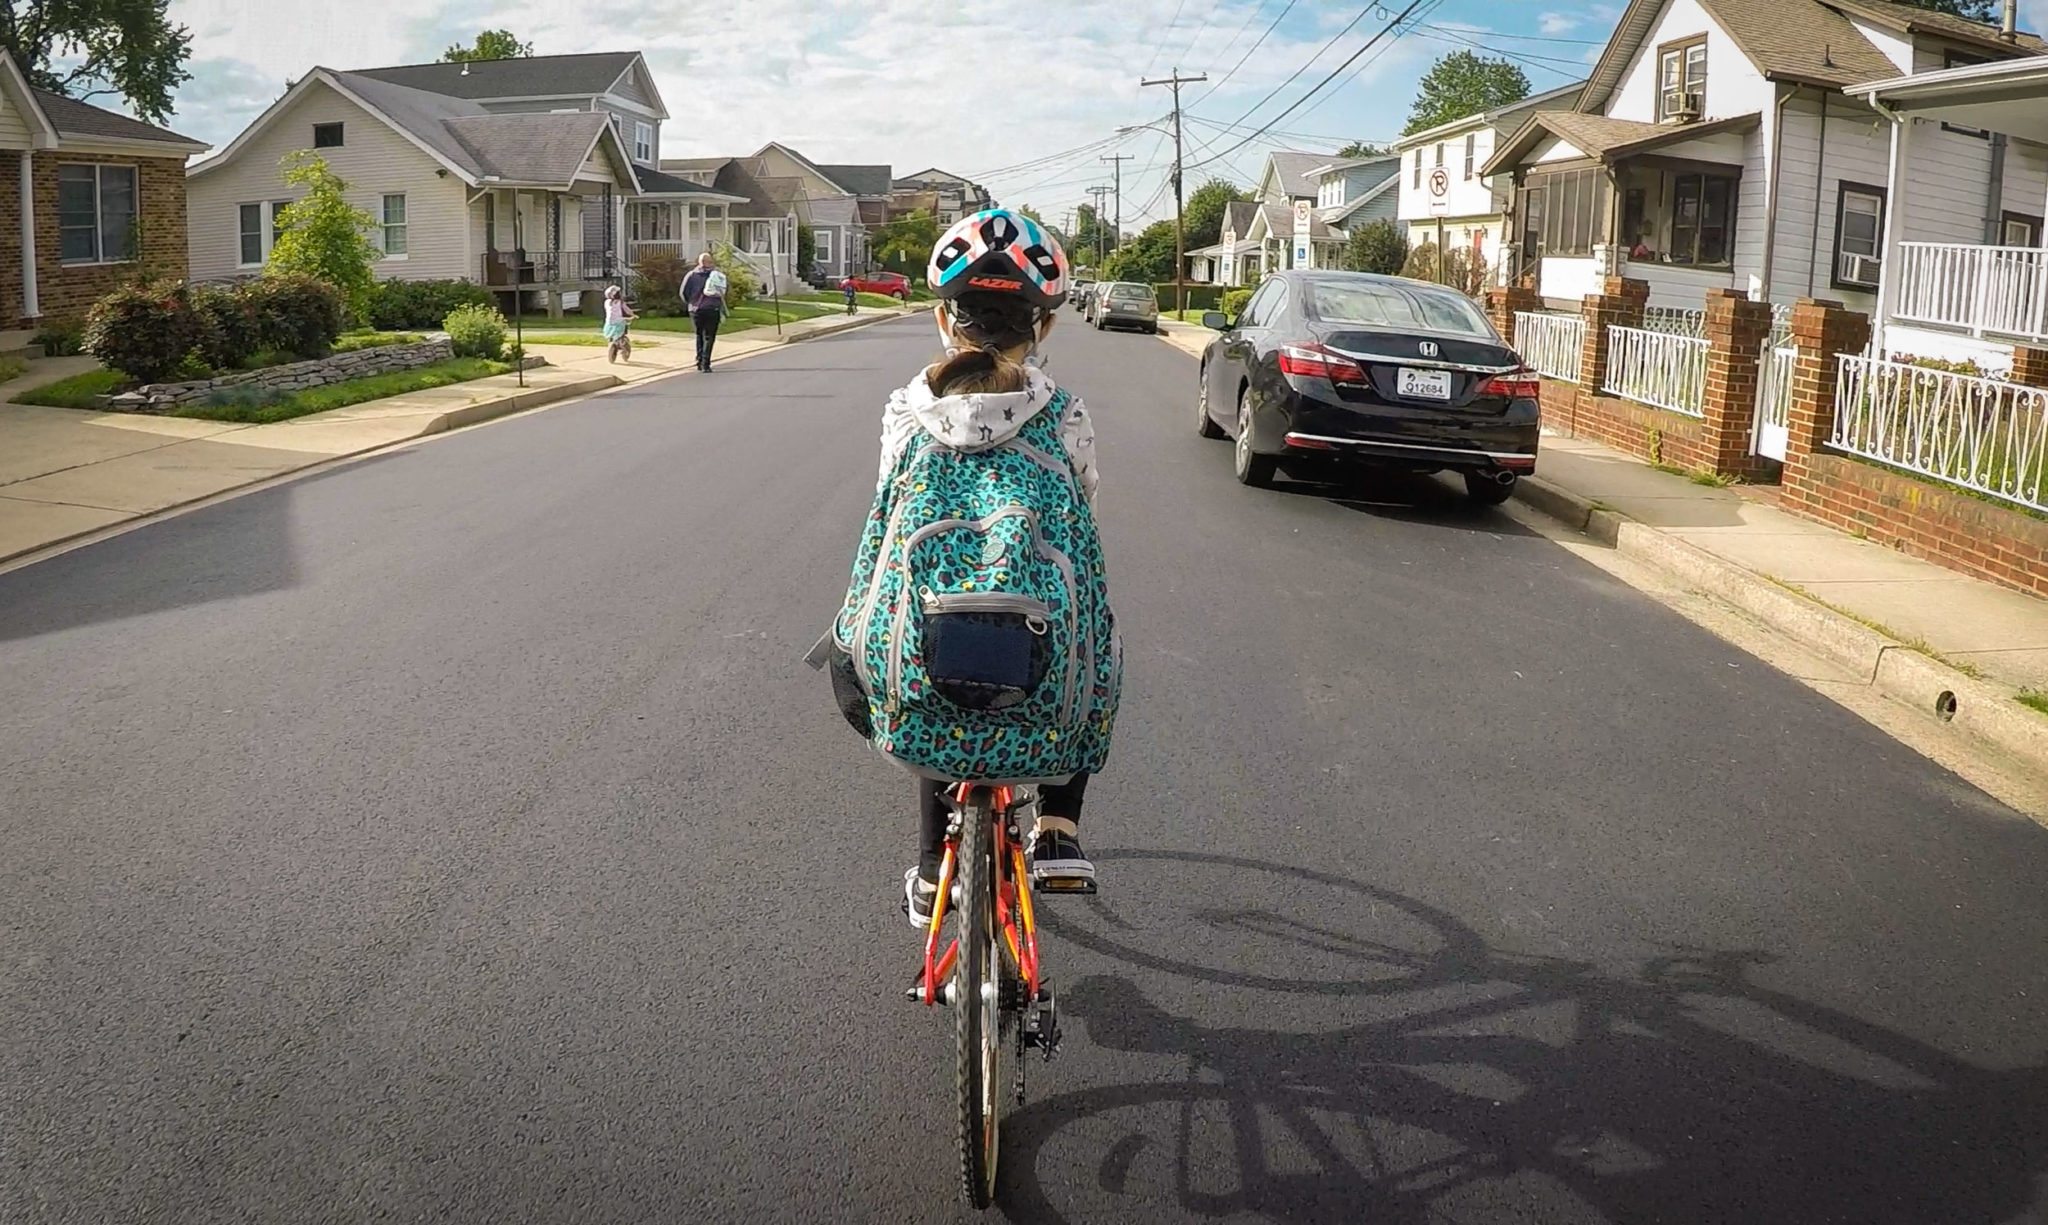 A young girl riding her bike on a calm neighborhood street, wearing a helmet and a large colorful book bag.